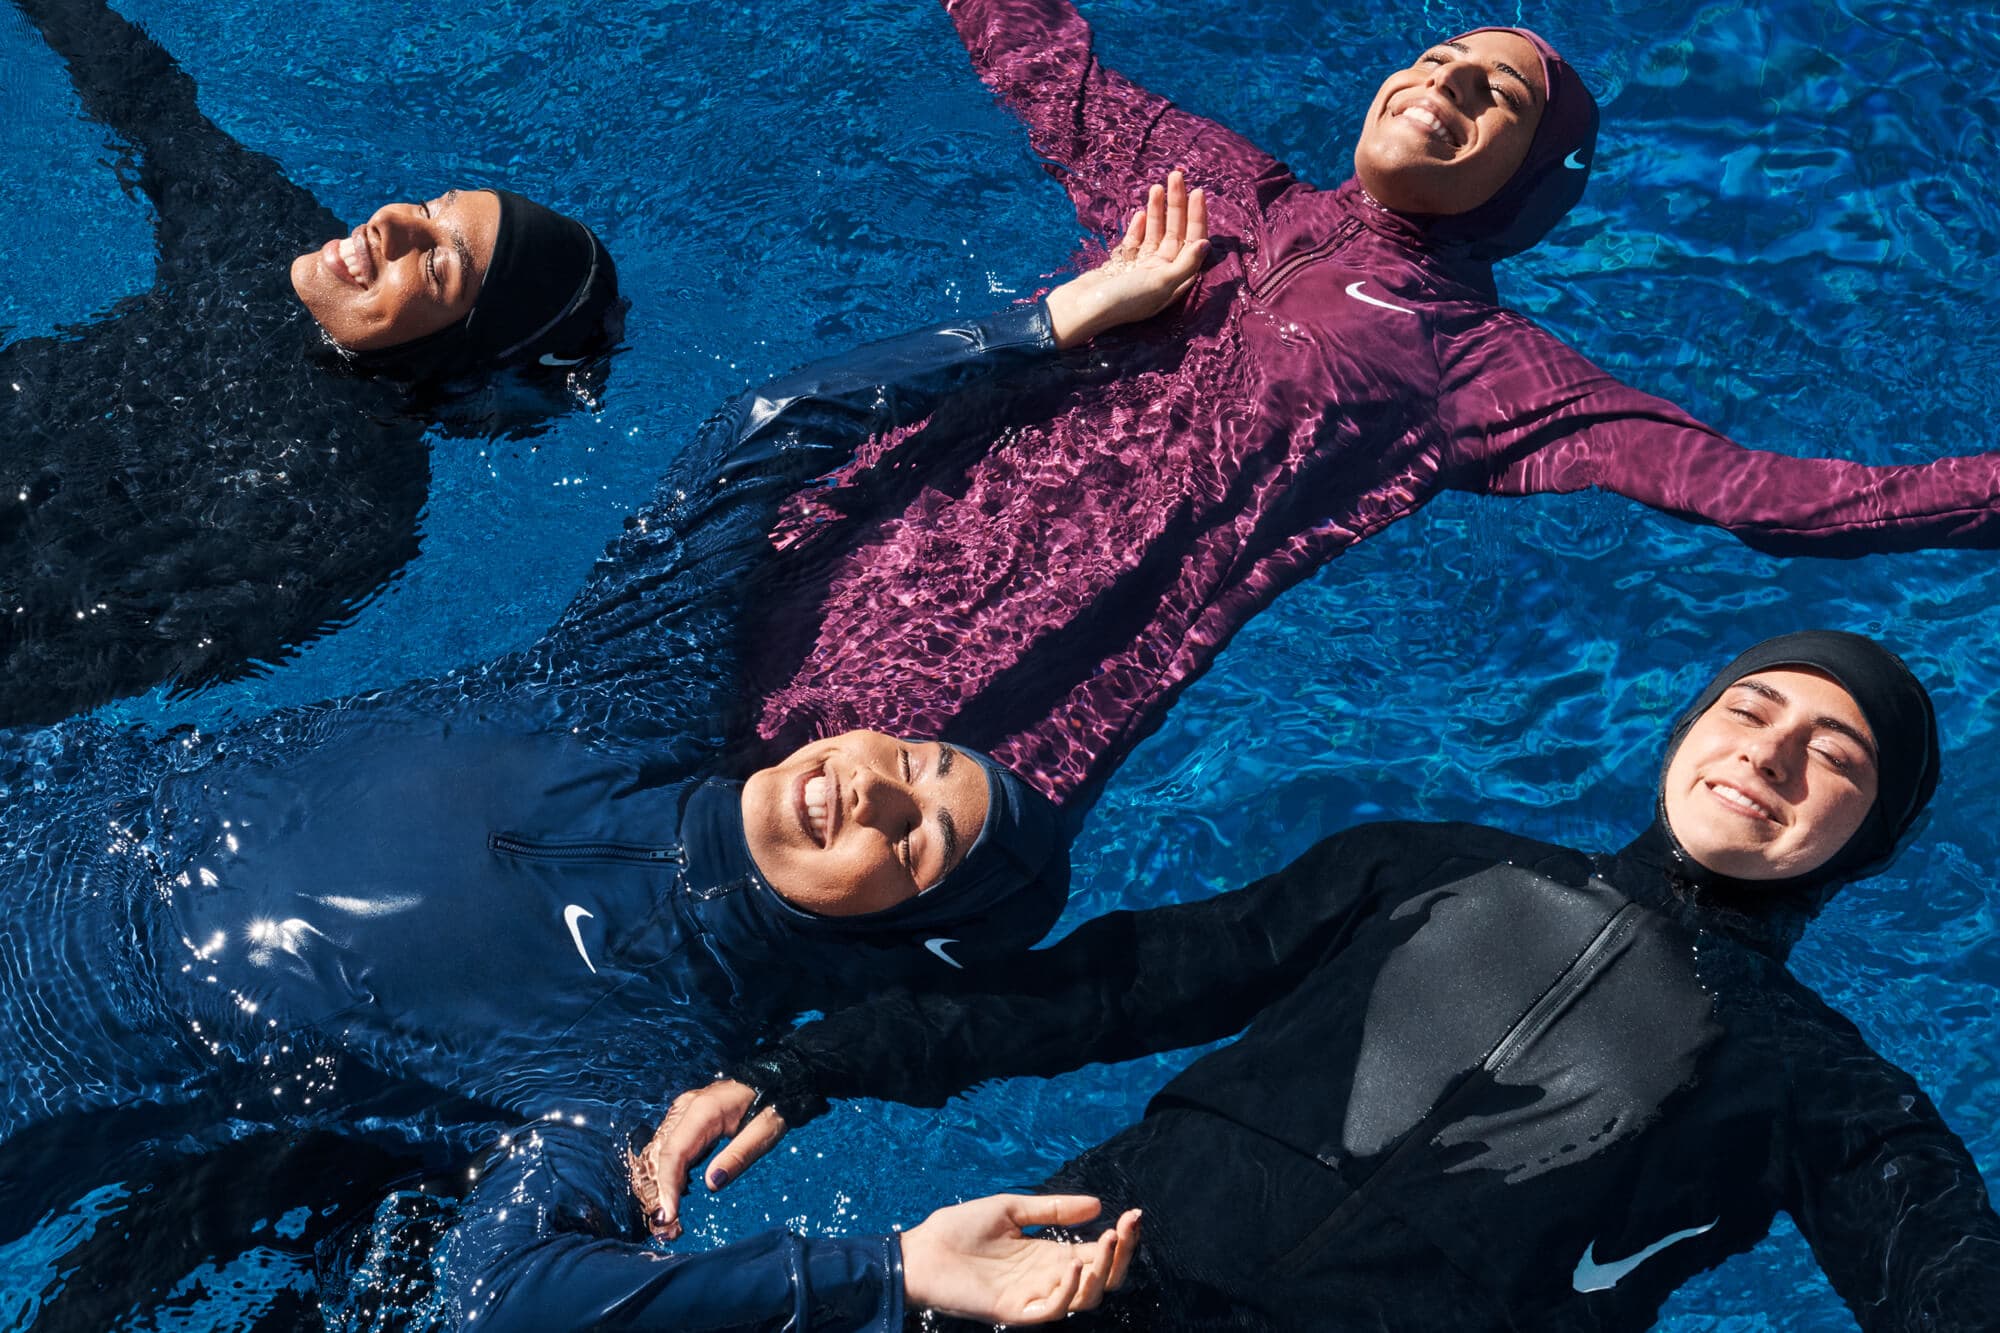 Nike, Victory Swim Campaign - Inspired by the feeling of weightlessness and freedom swimming gives women around the world